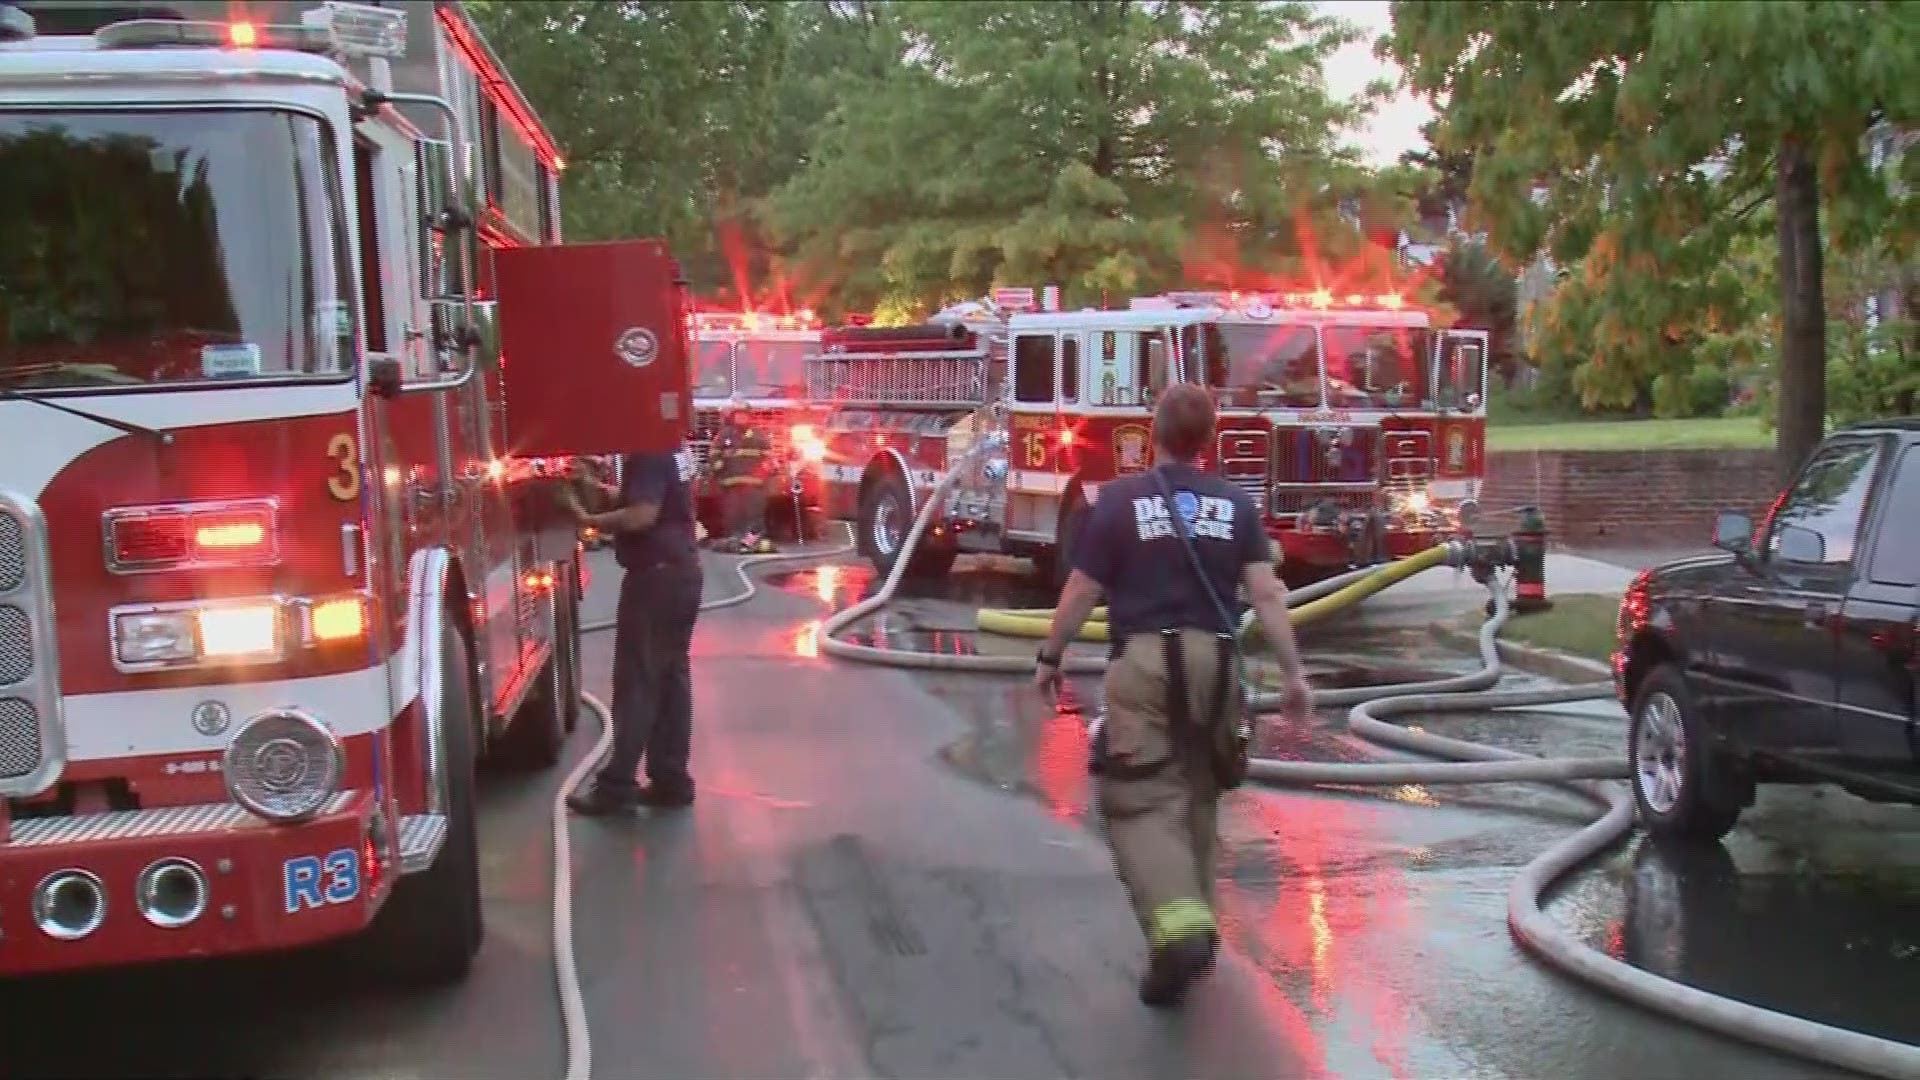 D.C. Fire and EMS crews were called to the scene of a burning basement at a 2-story home on Highview Terrace in Southeast, D.C.